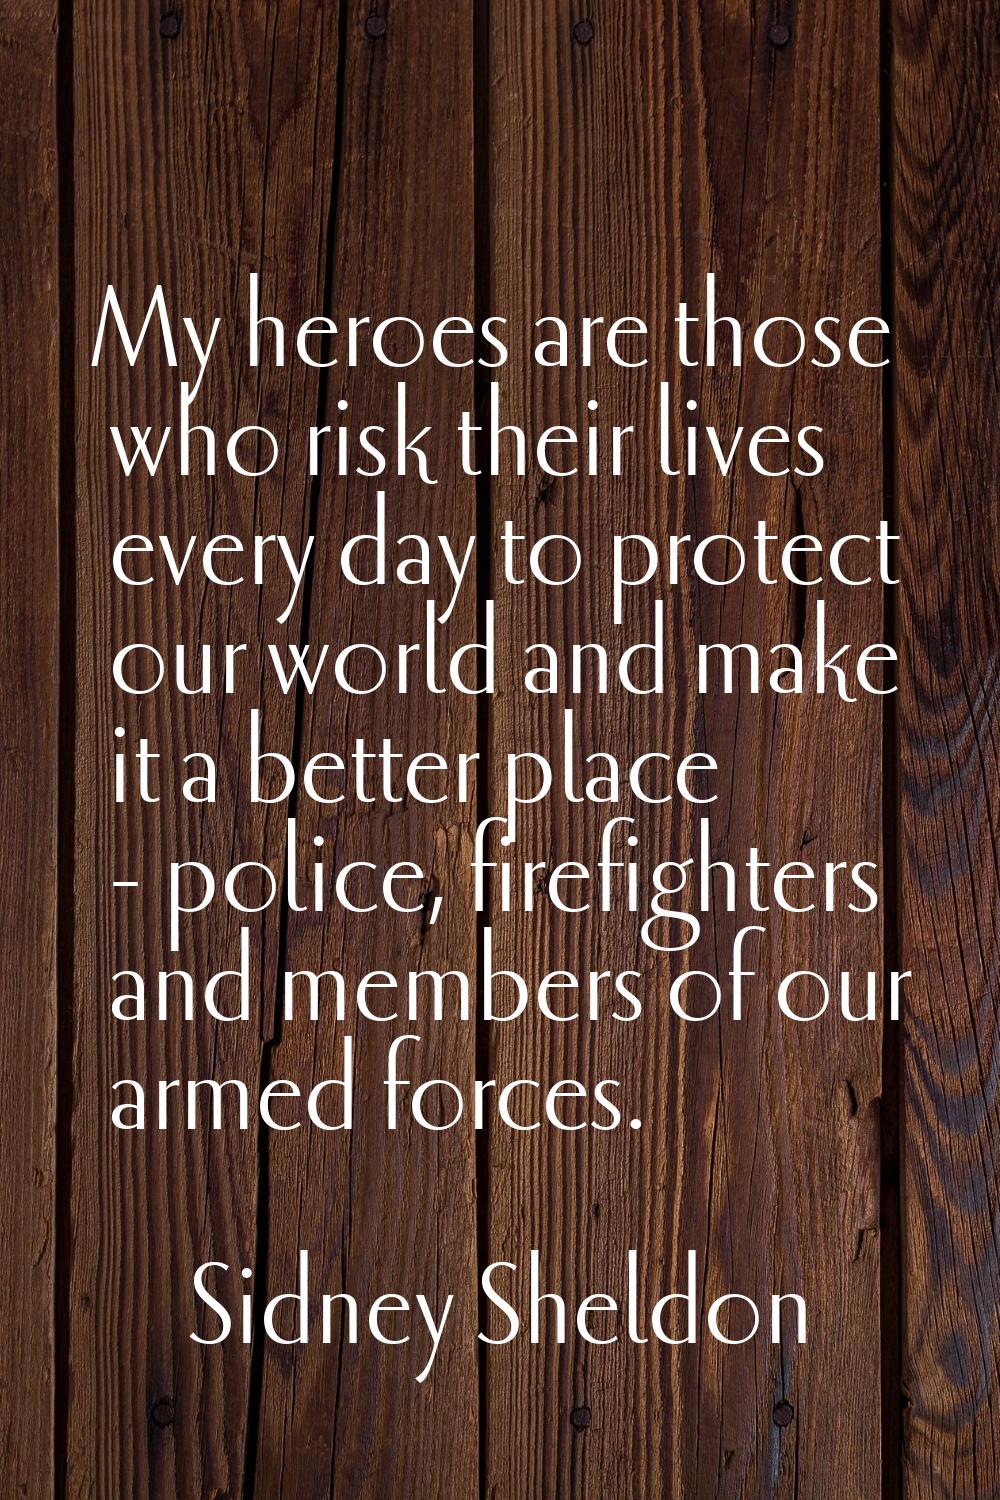 My heroes are those who risk their lives every day to protect our world and make it a better place 